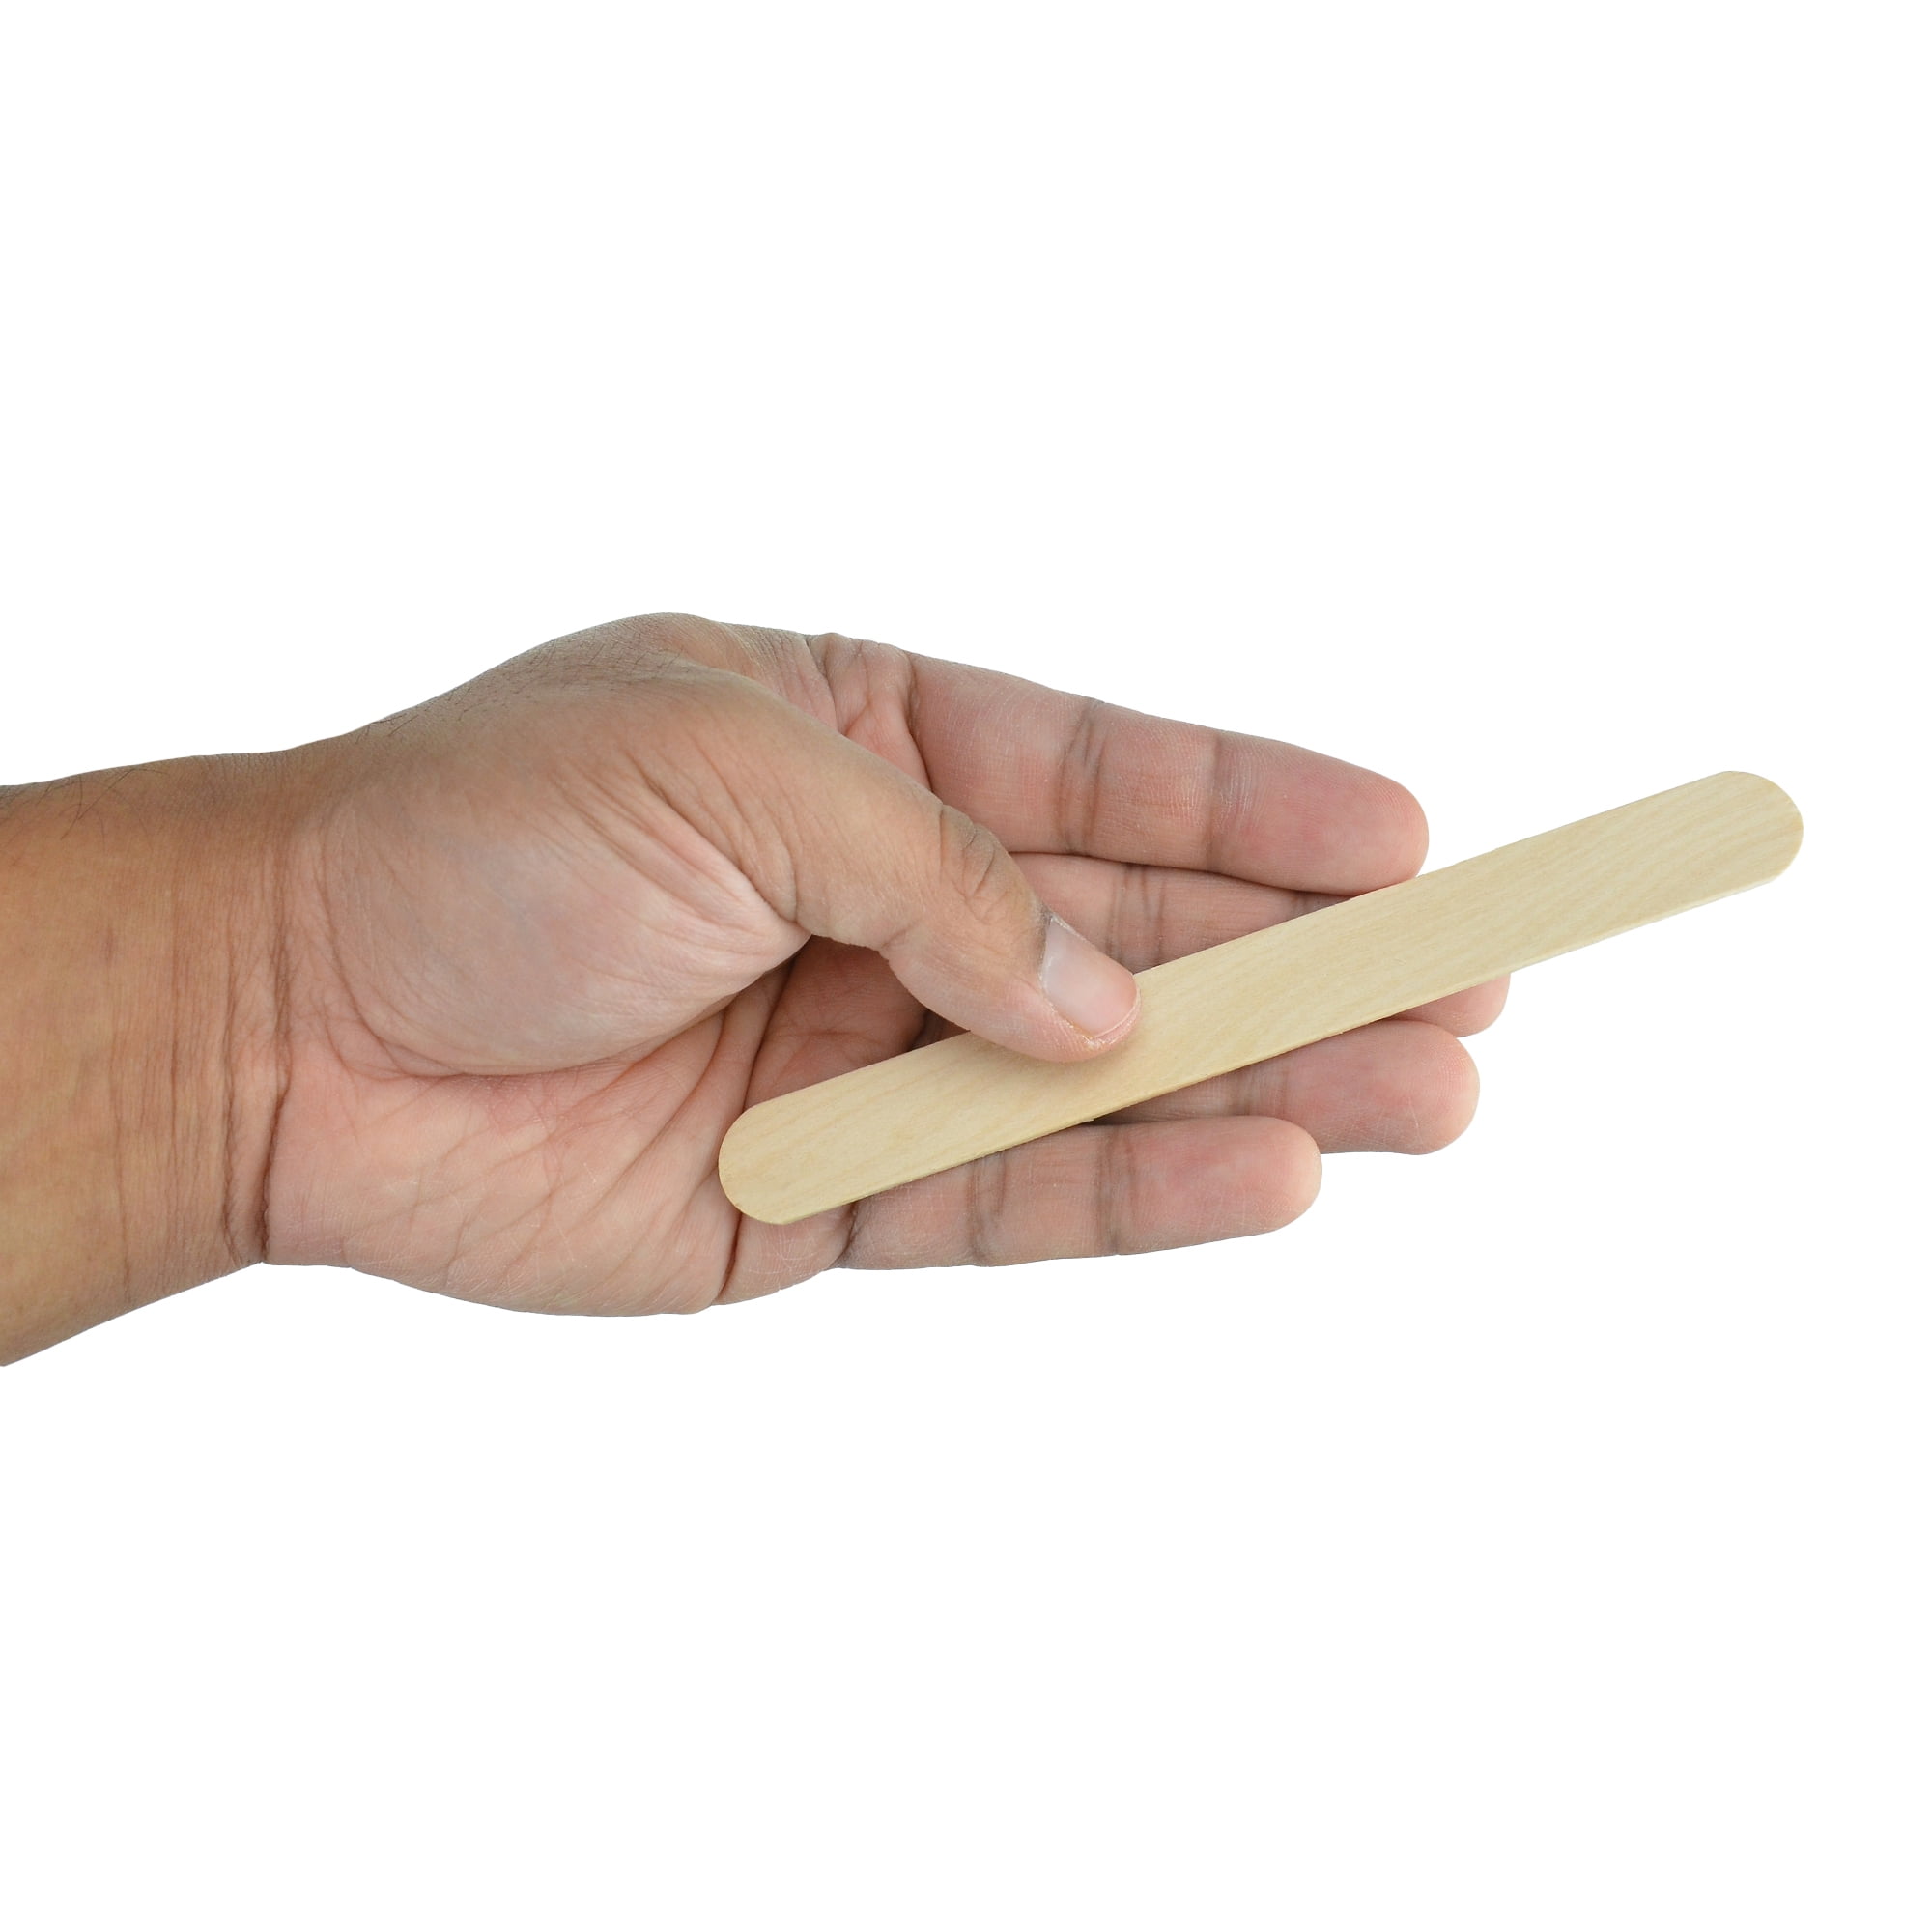 Dealmed 5.5” Junior Tongue Depressors – 100 Sterile Wood Tongue Depressor  Sticks, Can Be Used as Tongue Depressors for Crafts, in Medical Practice,  Emergency First Aid Kits and More - Buy Online - 56871062